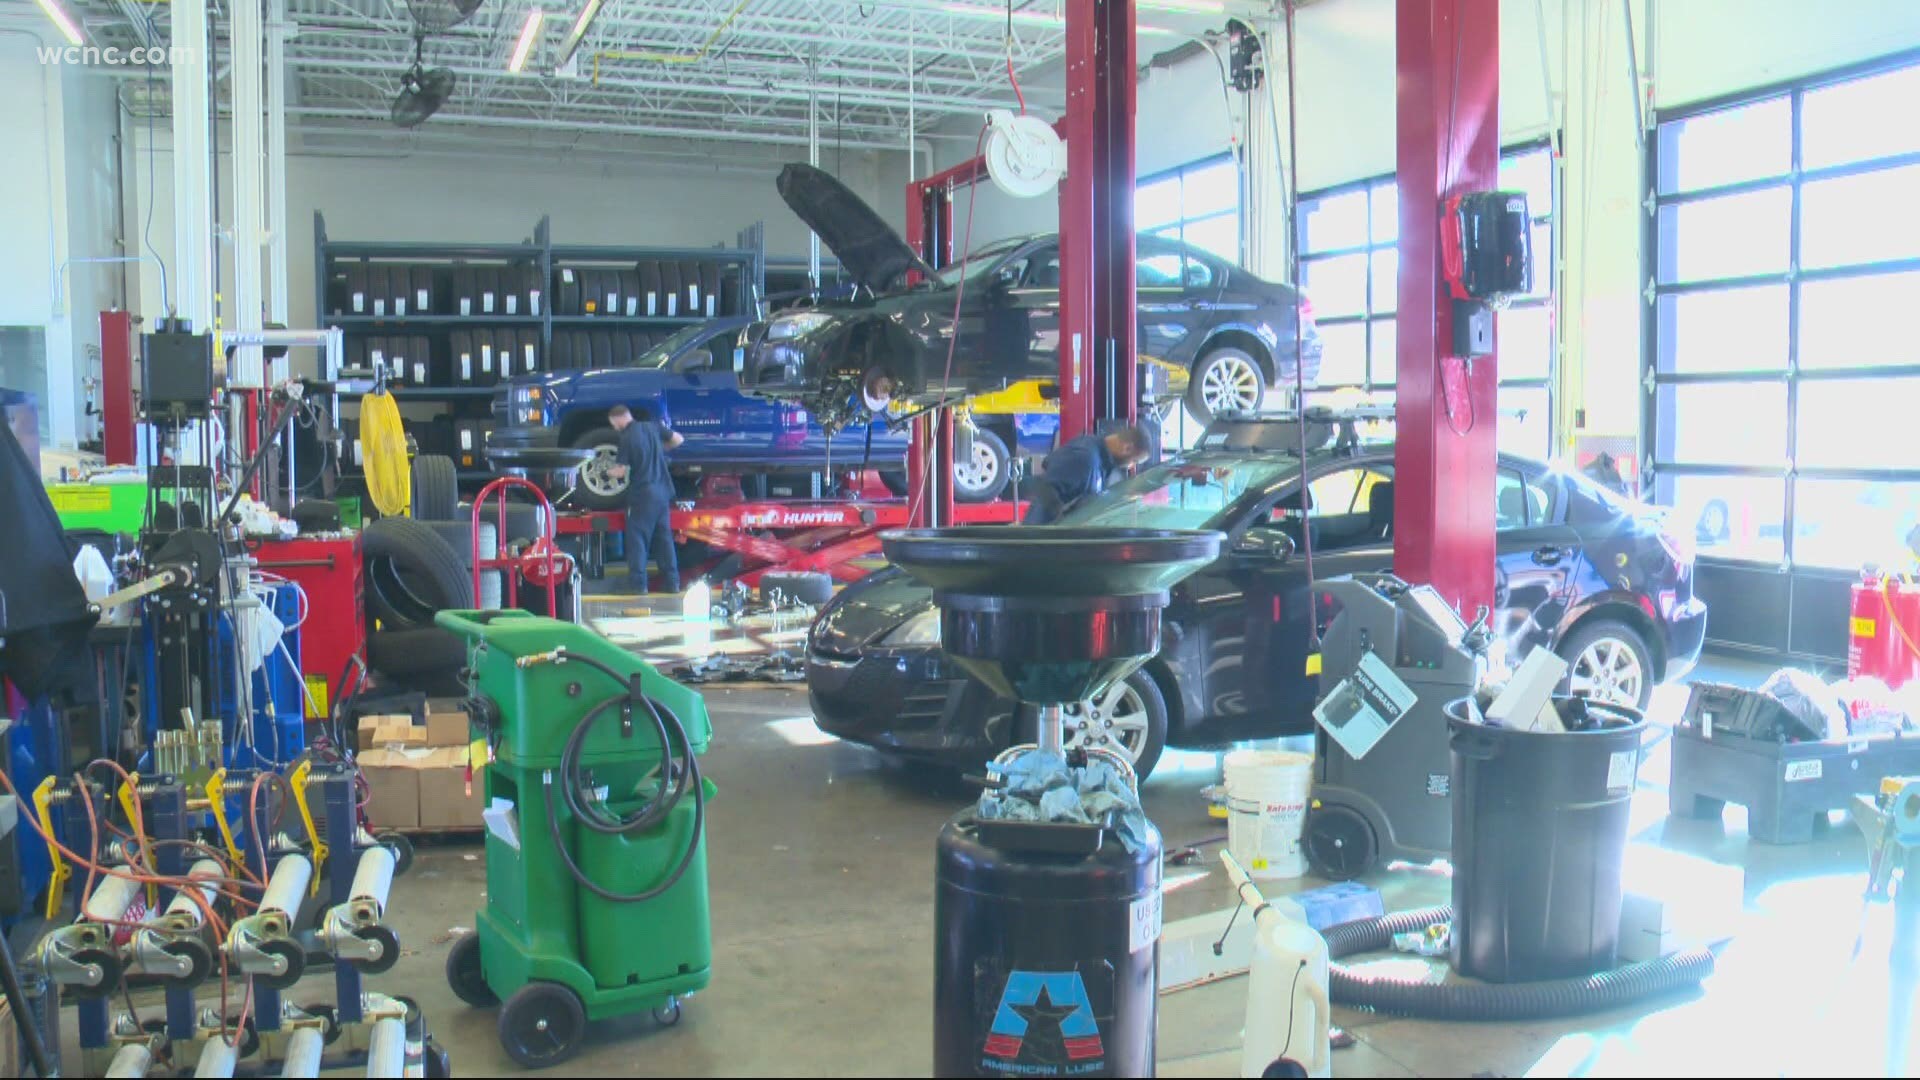 If you are not driving as much during these winter months, don't forget about your necessary car maintenance.